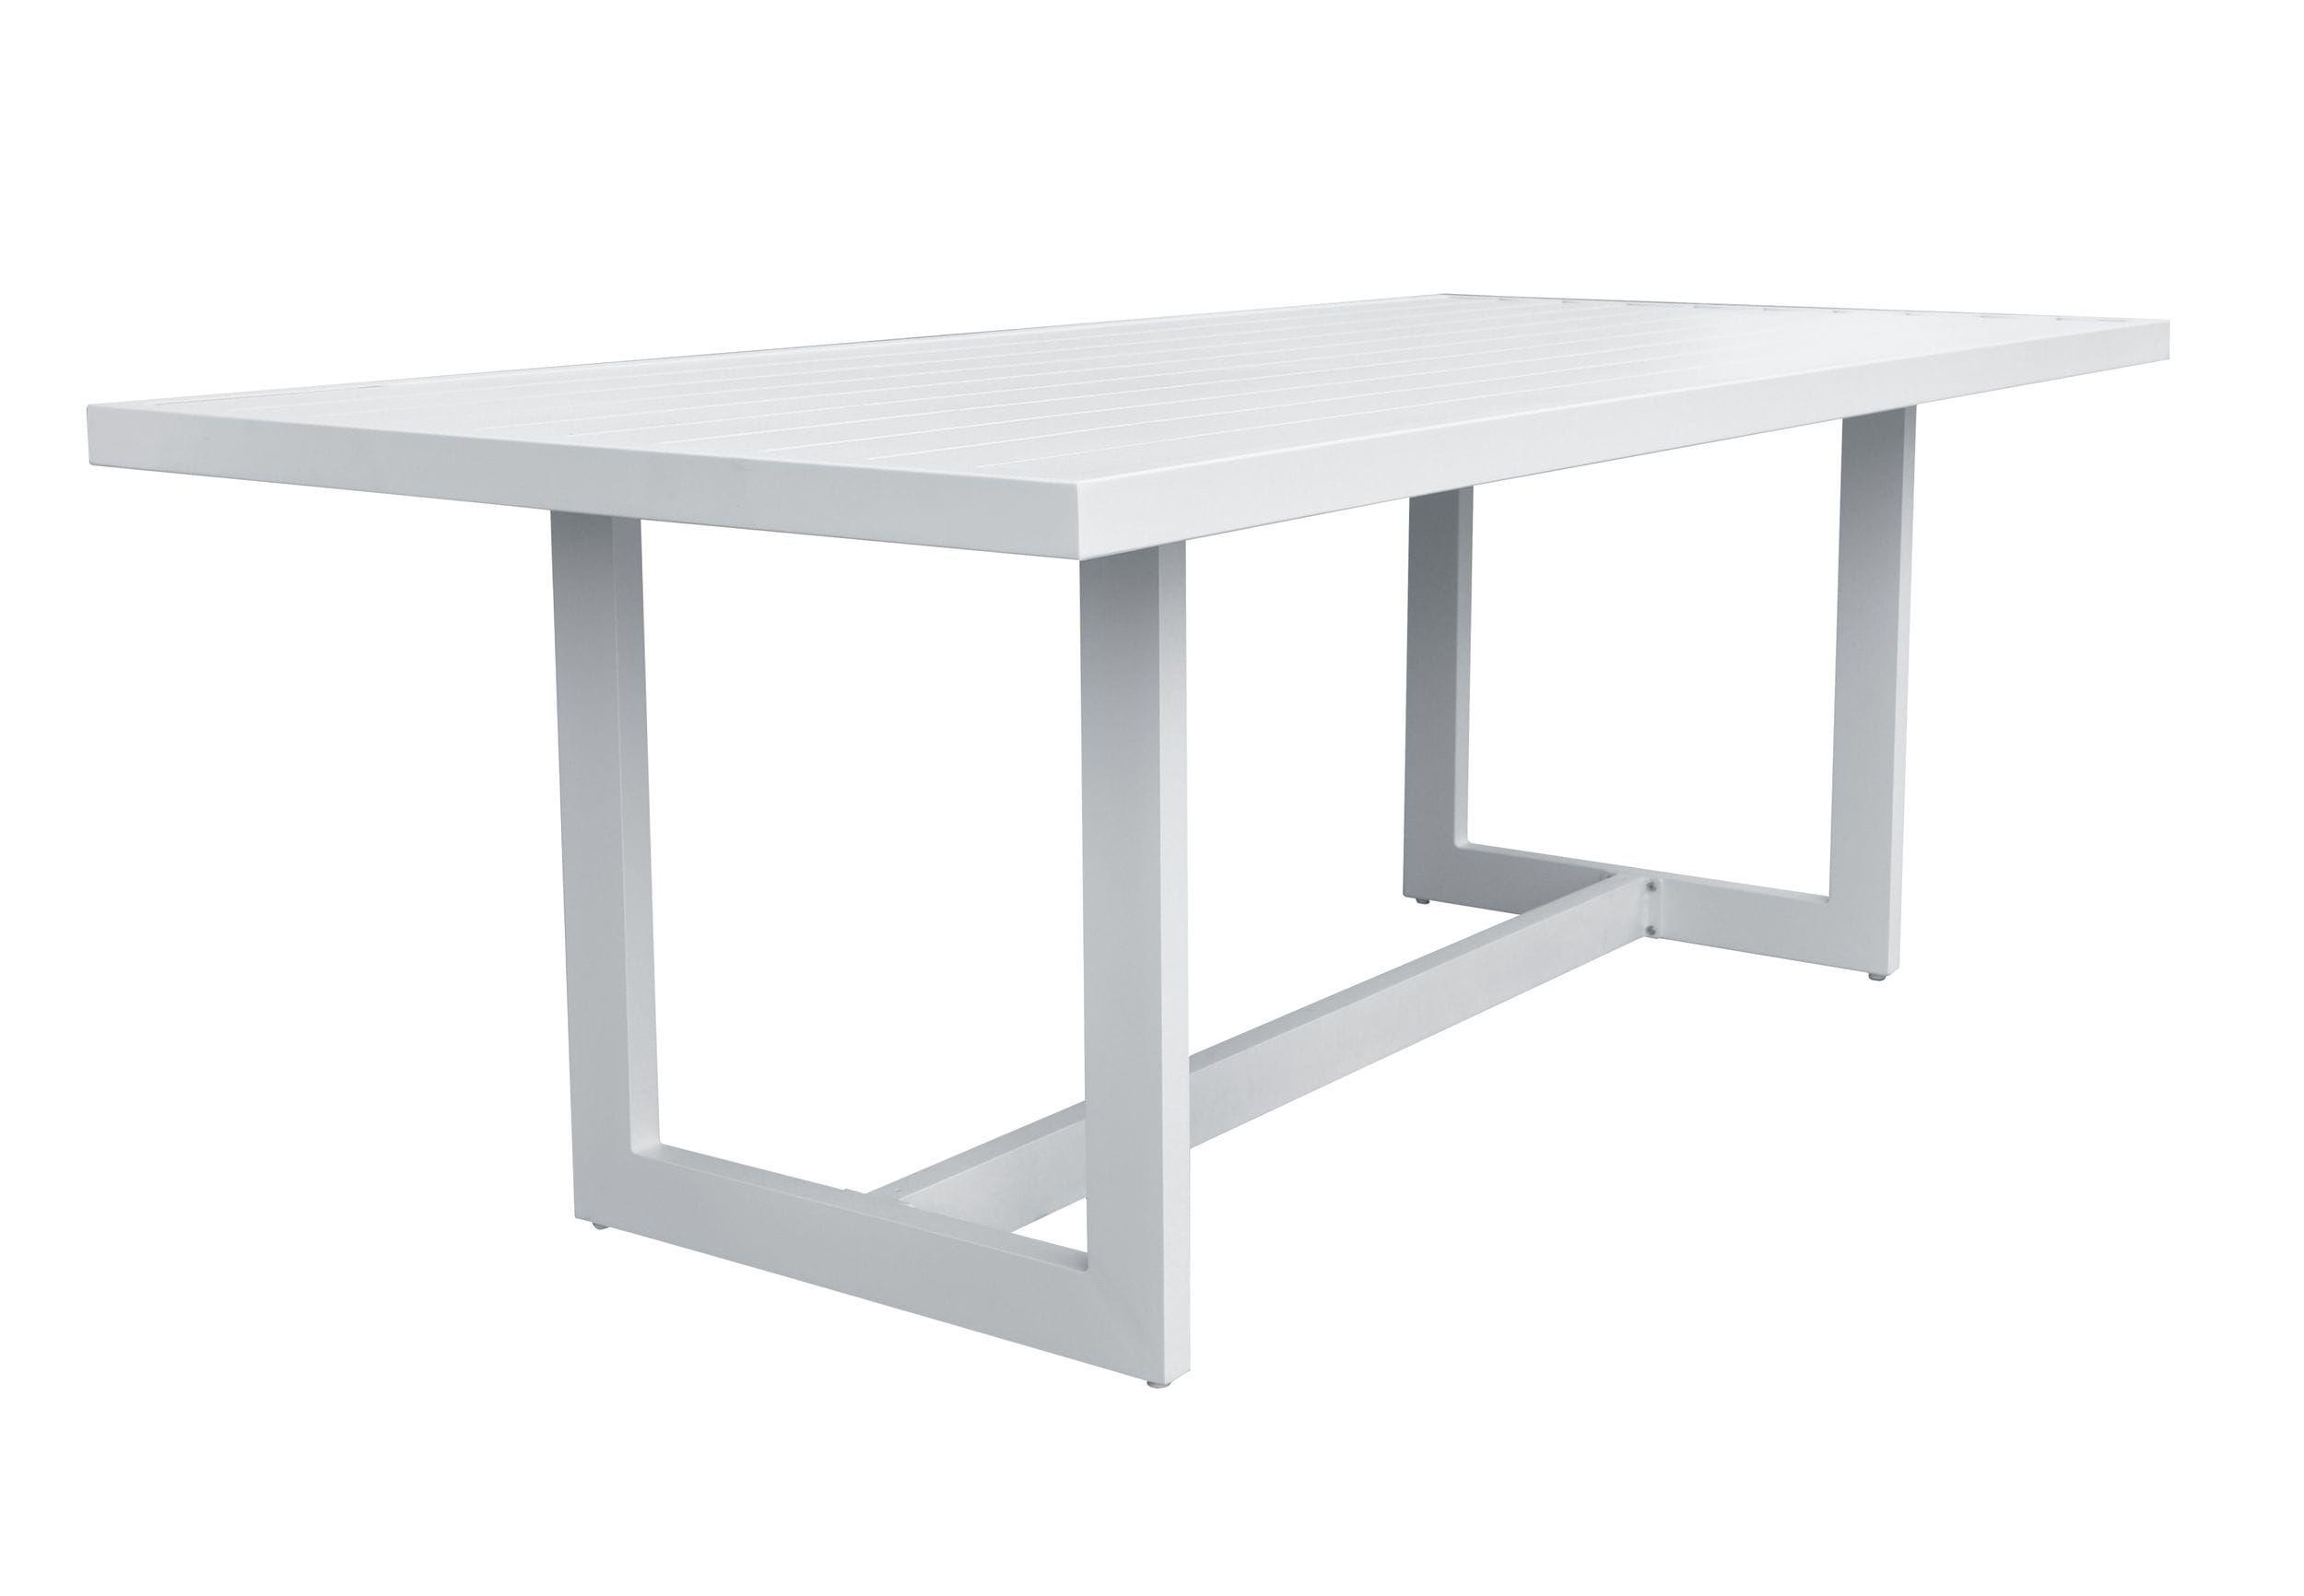 Modern Outdoor Dining Table Renava Wake Outdoor Dining Table VGGEMONTALK-CH-WHT-1 VGGEMONTALK-CH-WHT-1 in White 